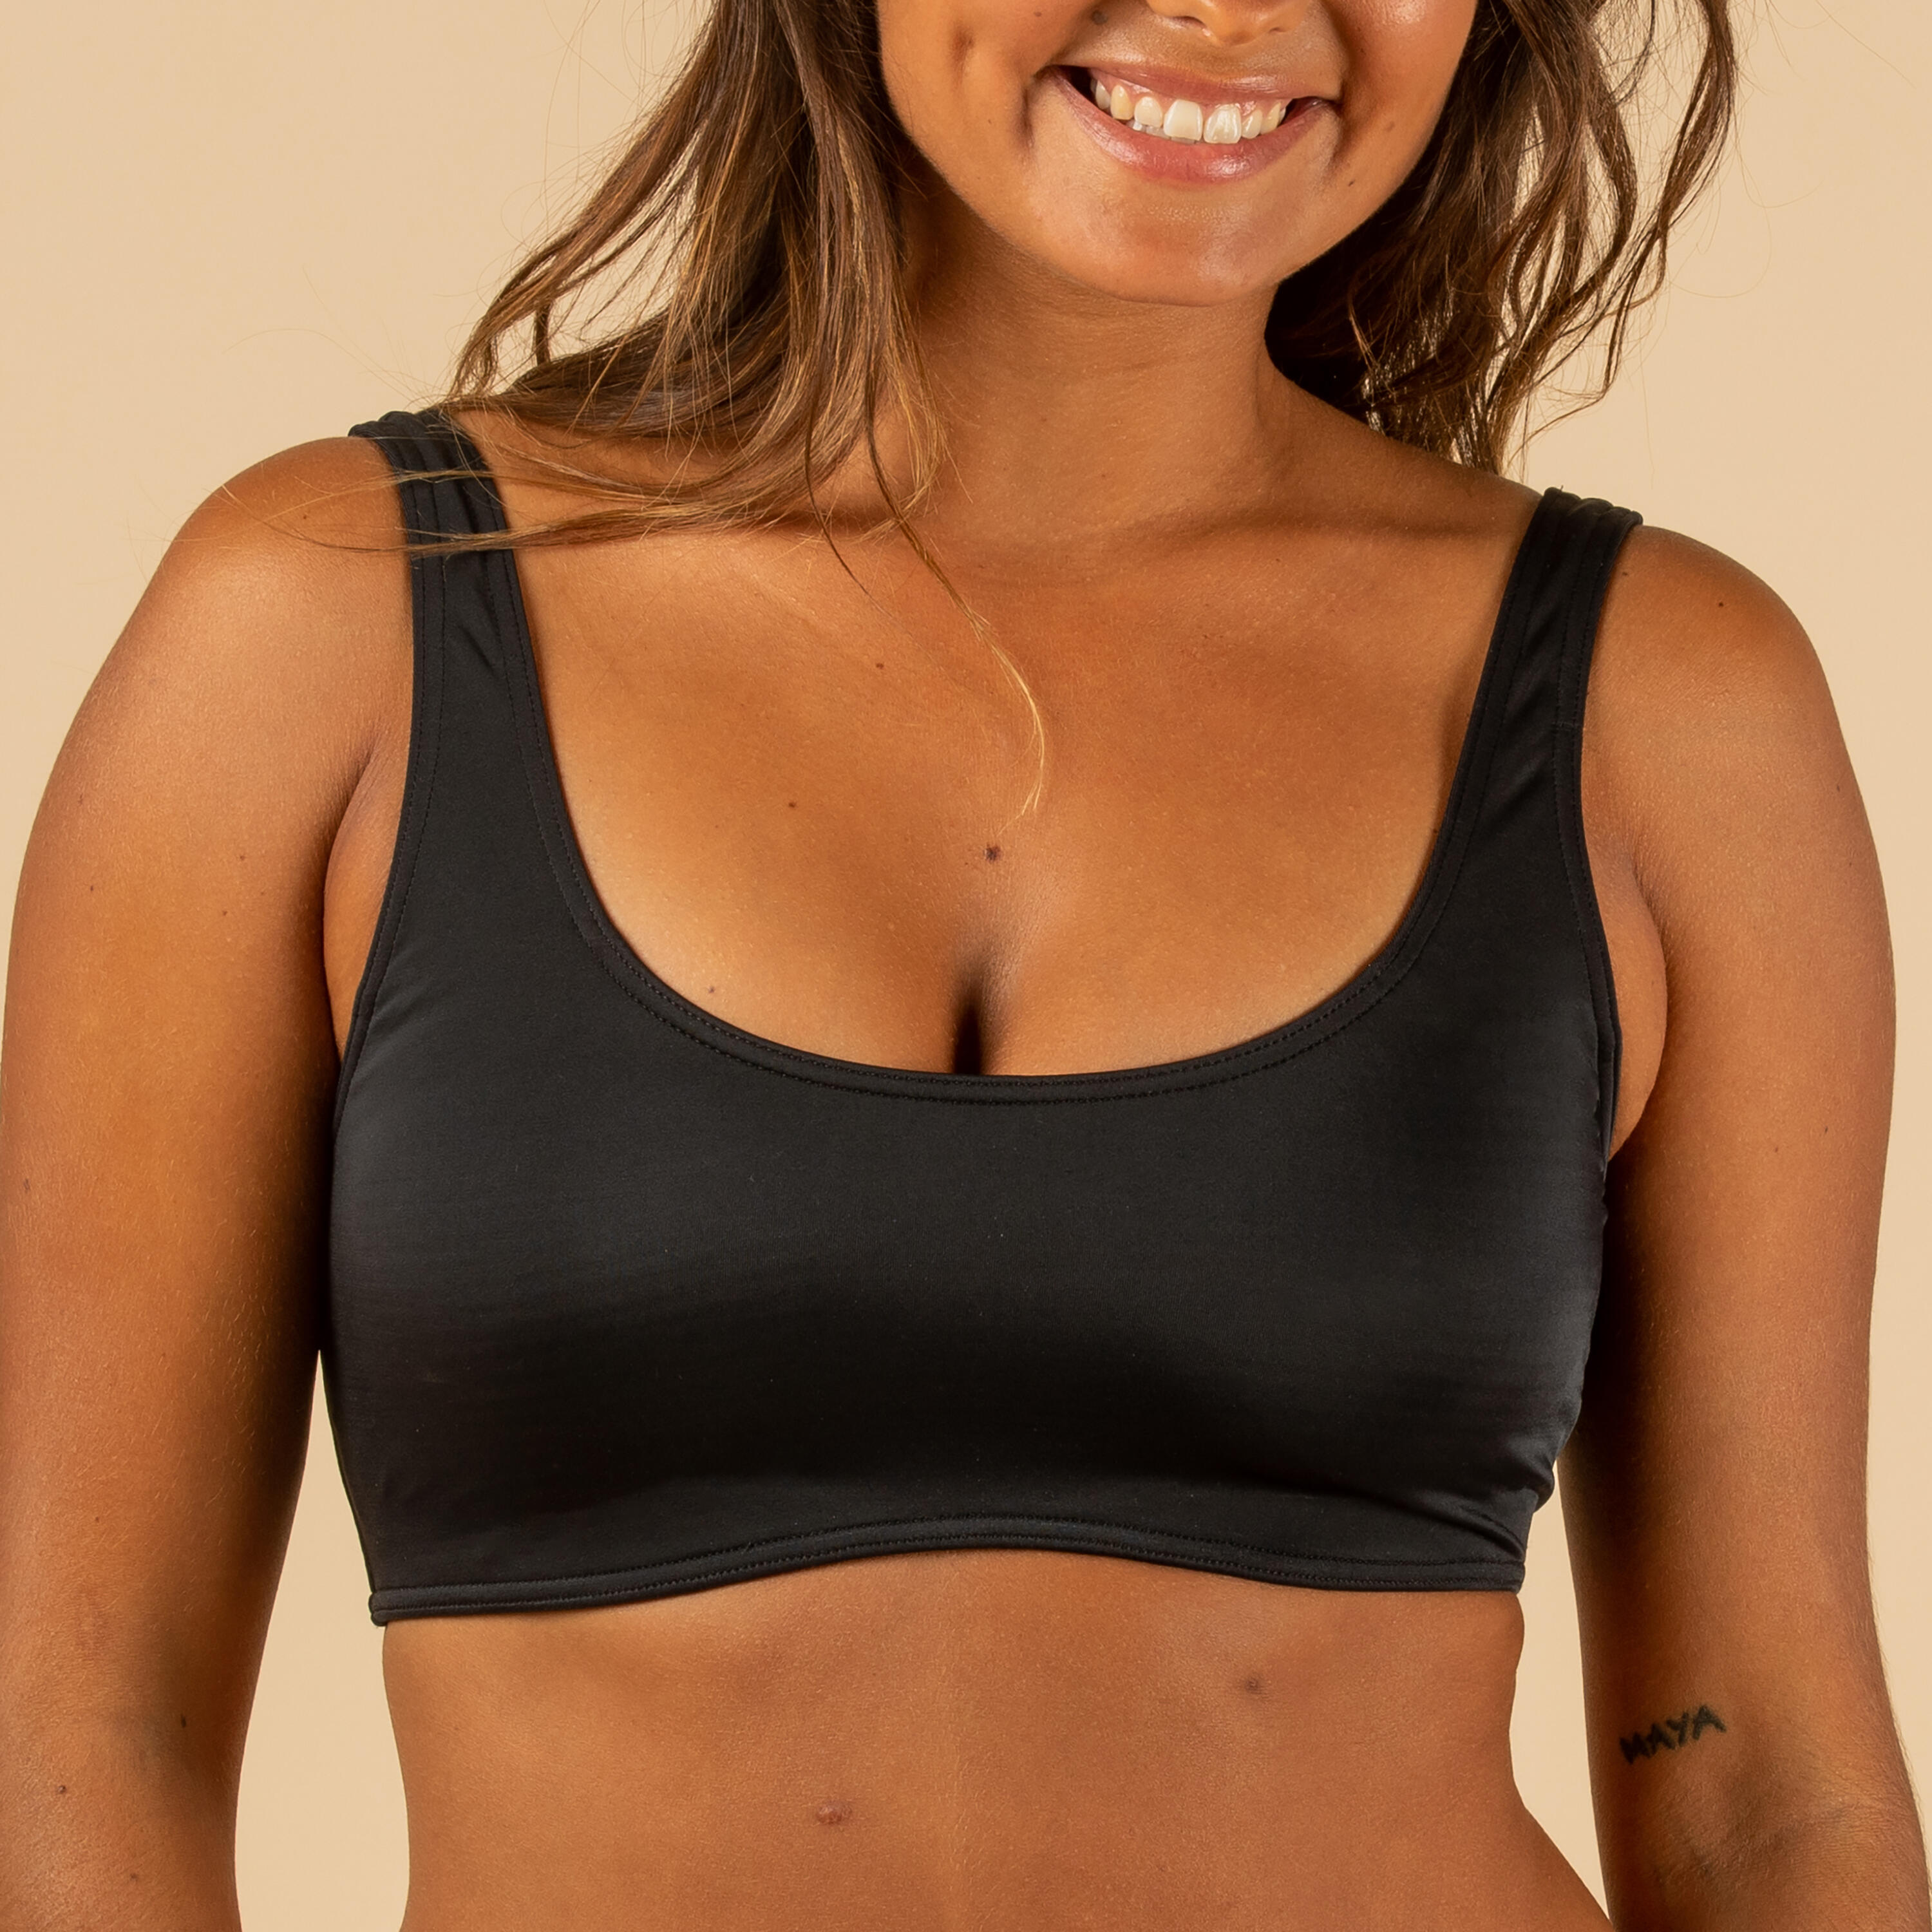 CROP TOP AURELY BLACK WITH REMOVABLE CUPS 5/8